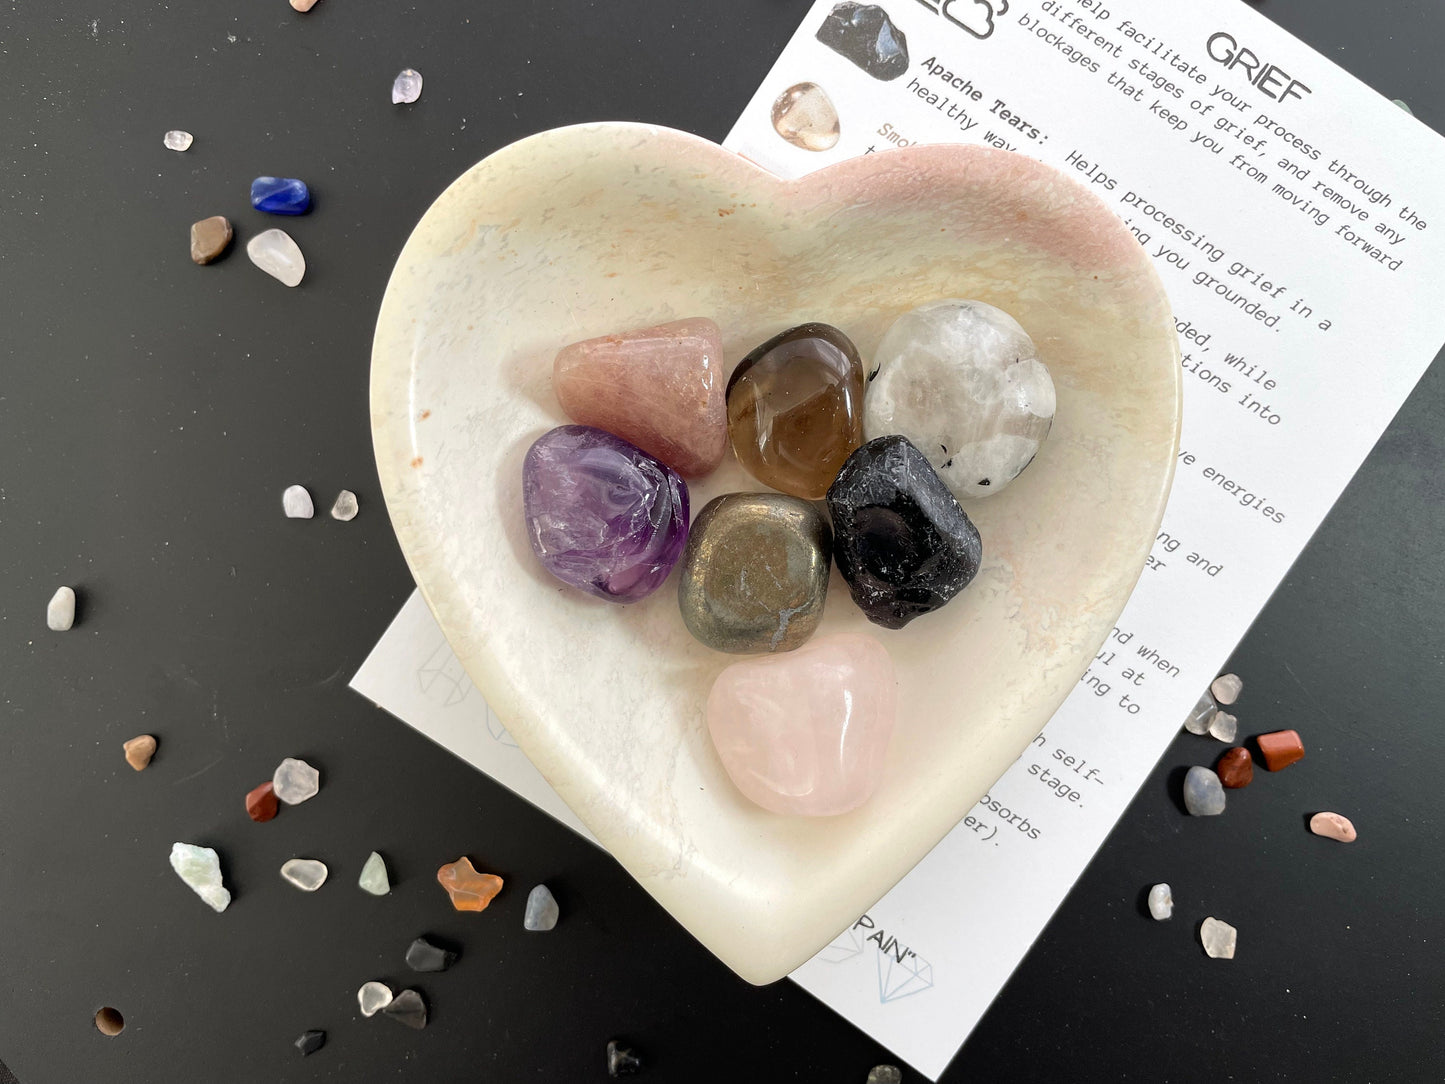 In Case of Grief, Crystals, Dish and Recorded Meditation | Sympathy Crystal Set | Bereavement Gift | Self Care Gifts